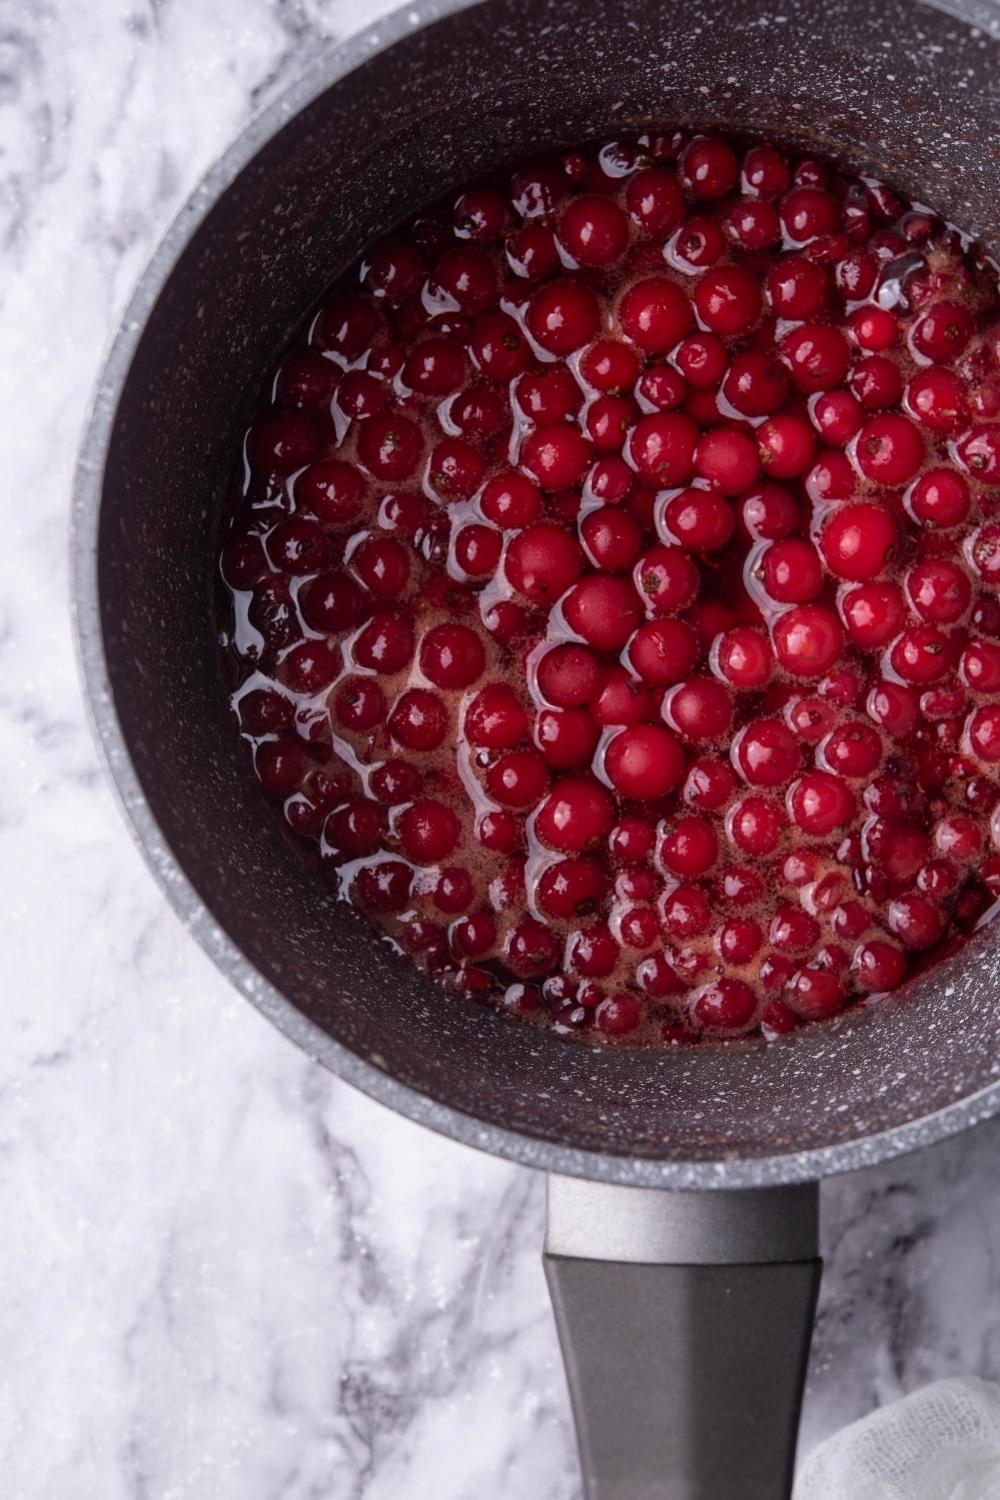 A close-up of a saucepan with homemade cranberry sauce in it.